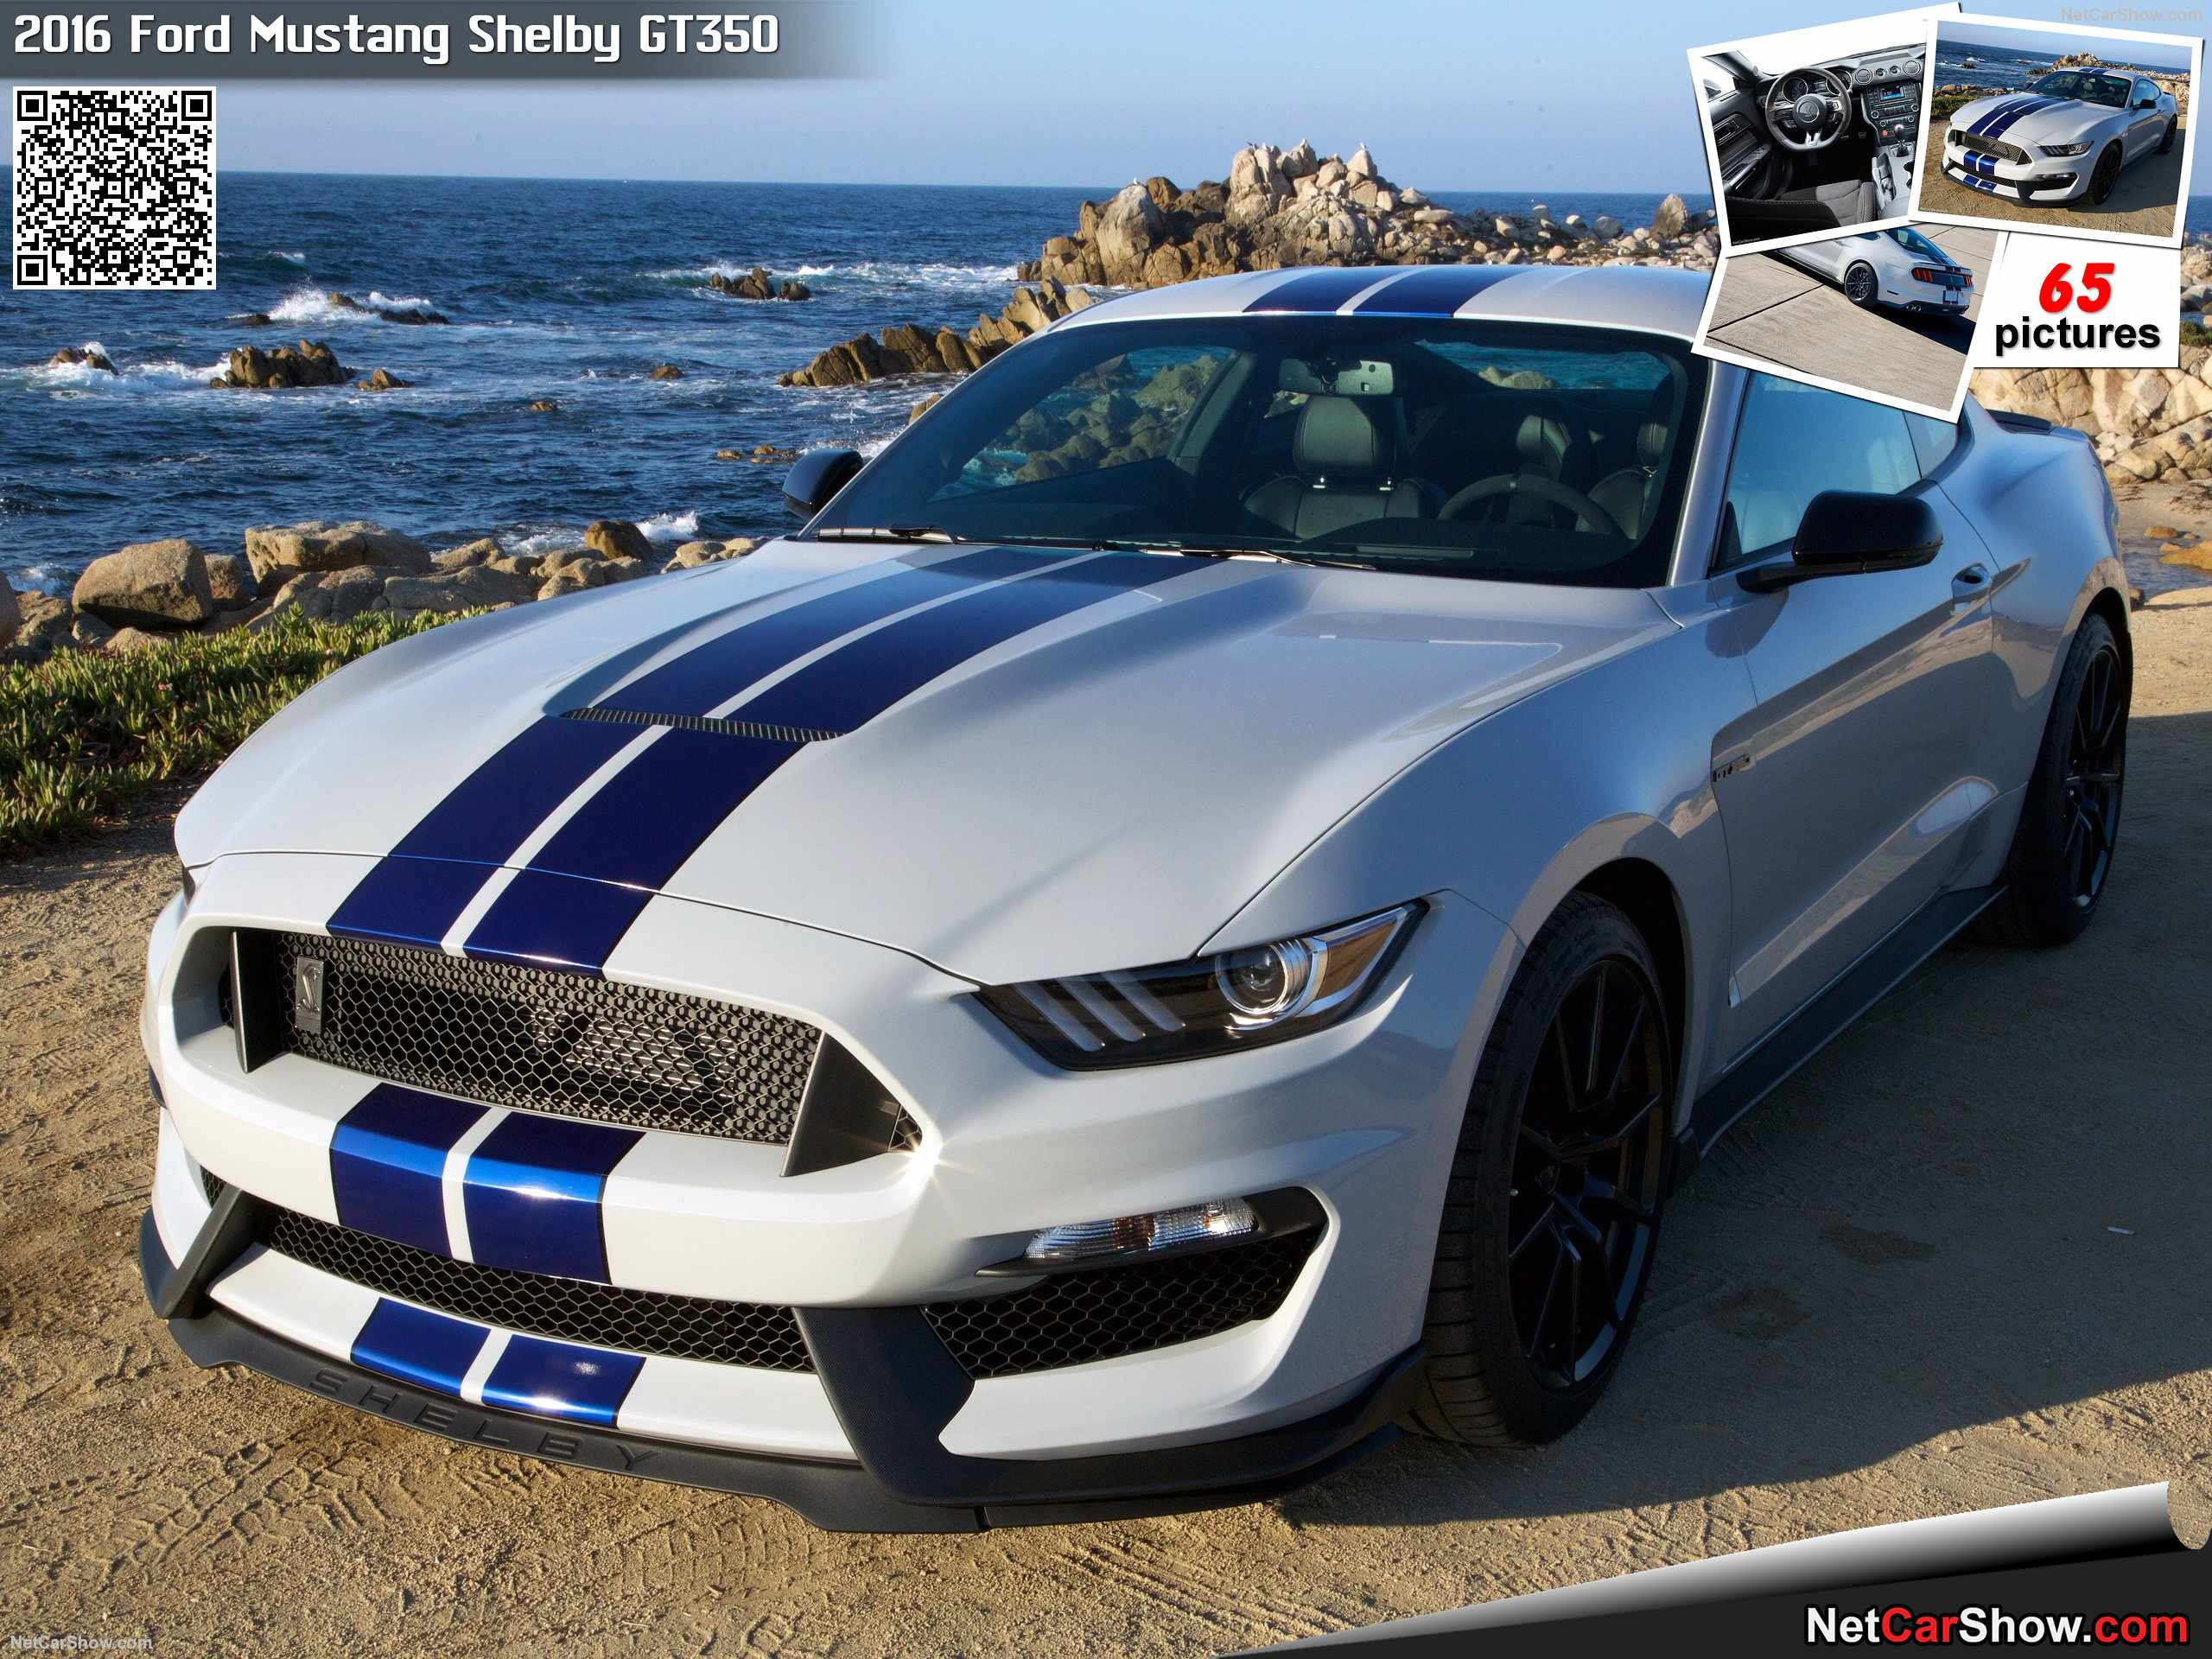 Ford Mustang_Shelby_GT350 2016 wallpaper